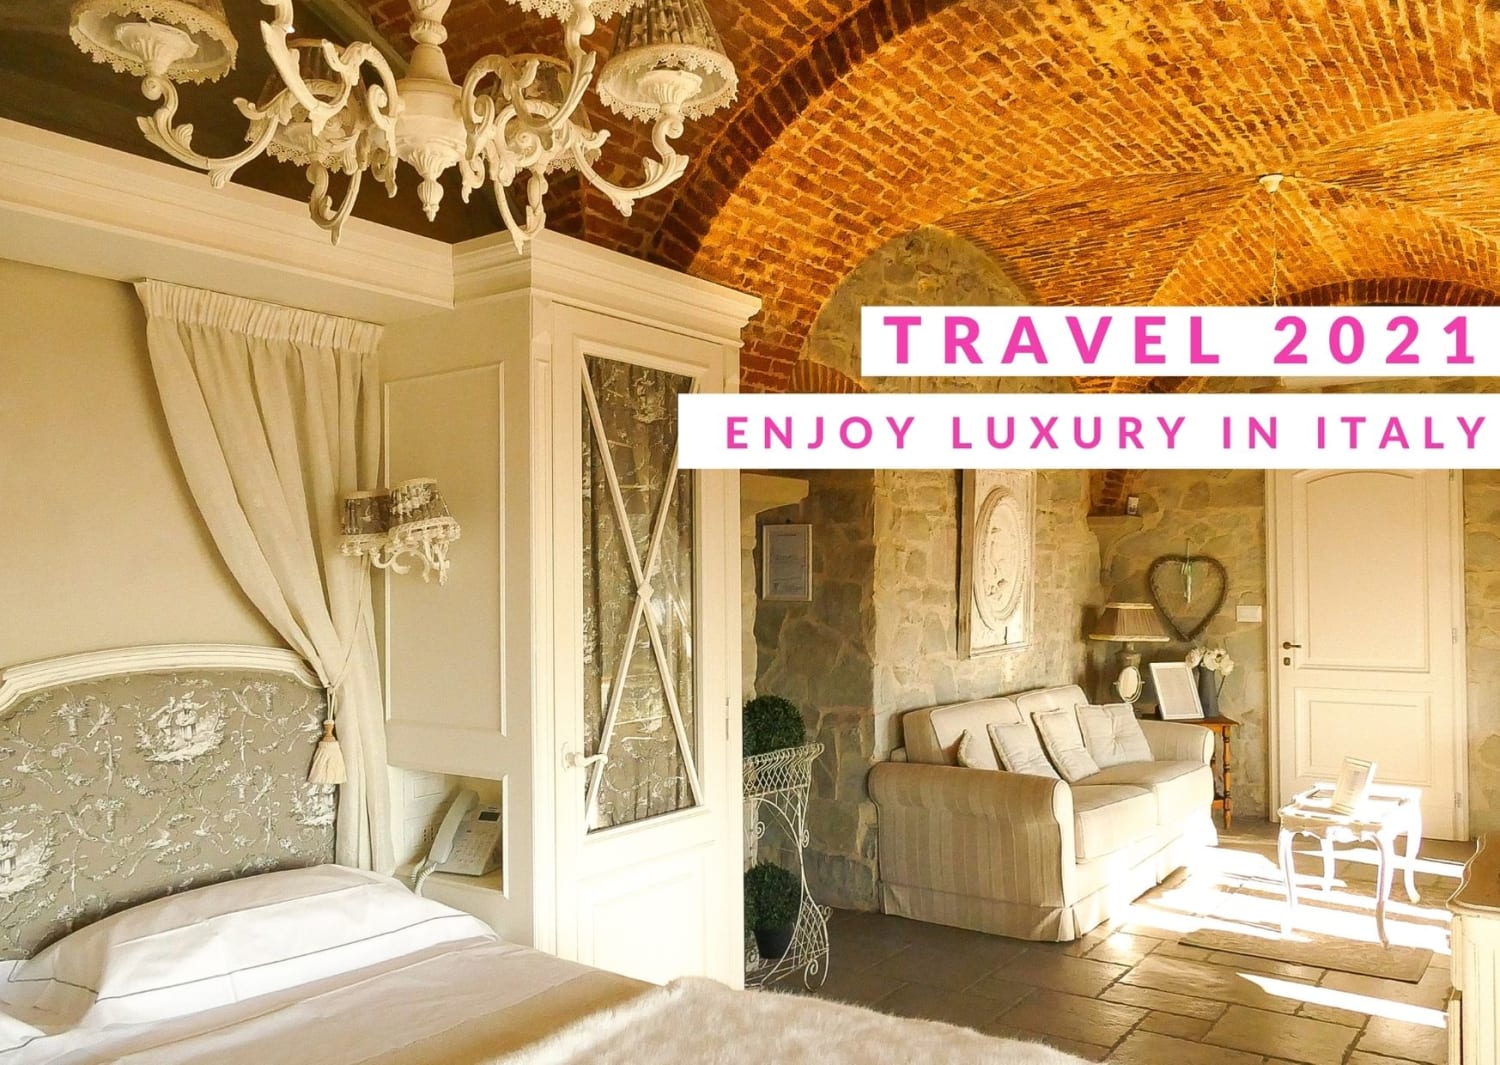 5 luxury Boutique hotels in Italy - Best in Travel 2021